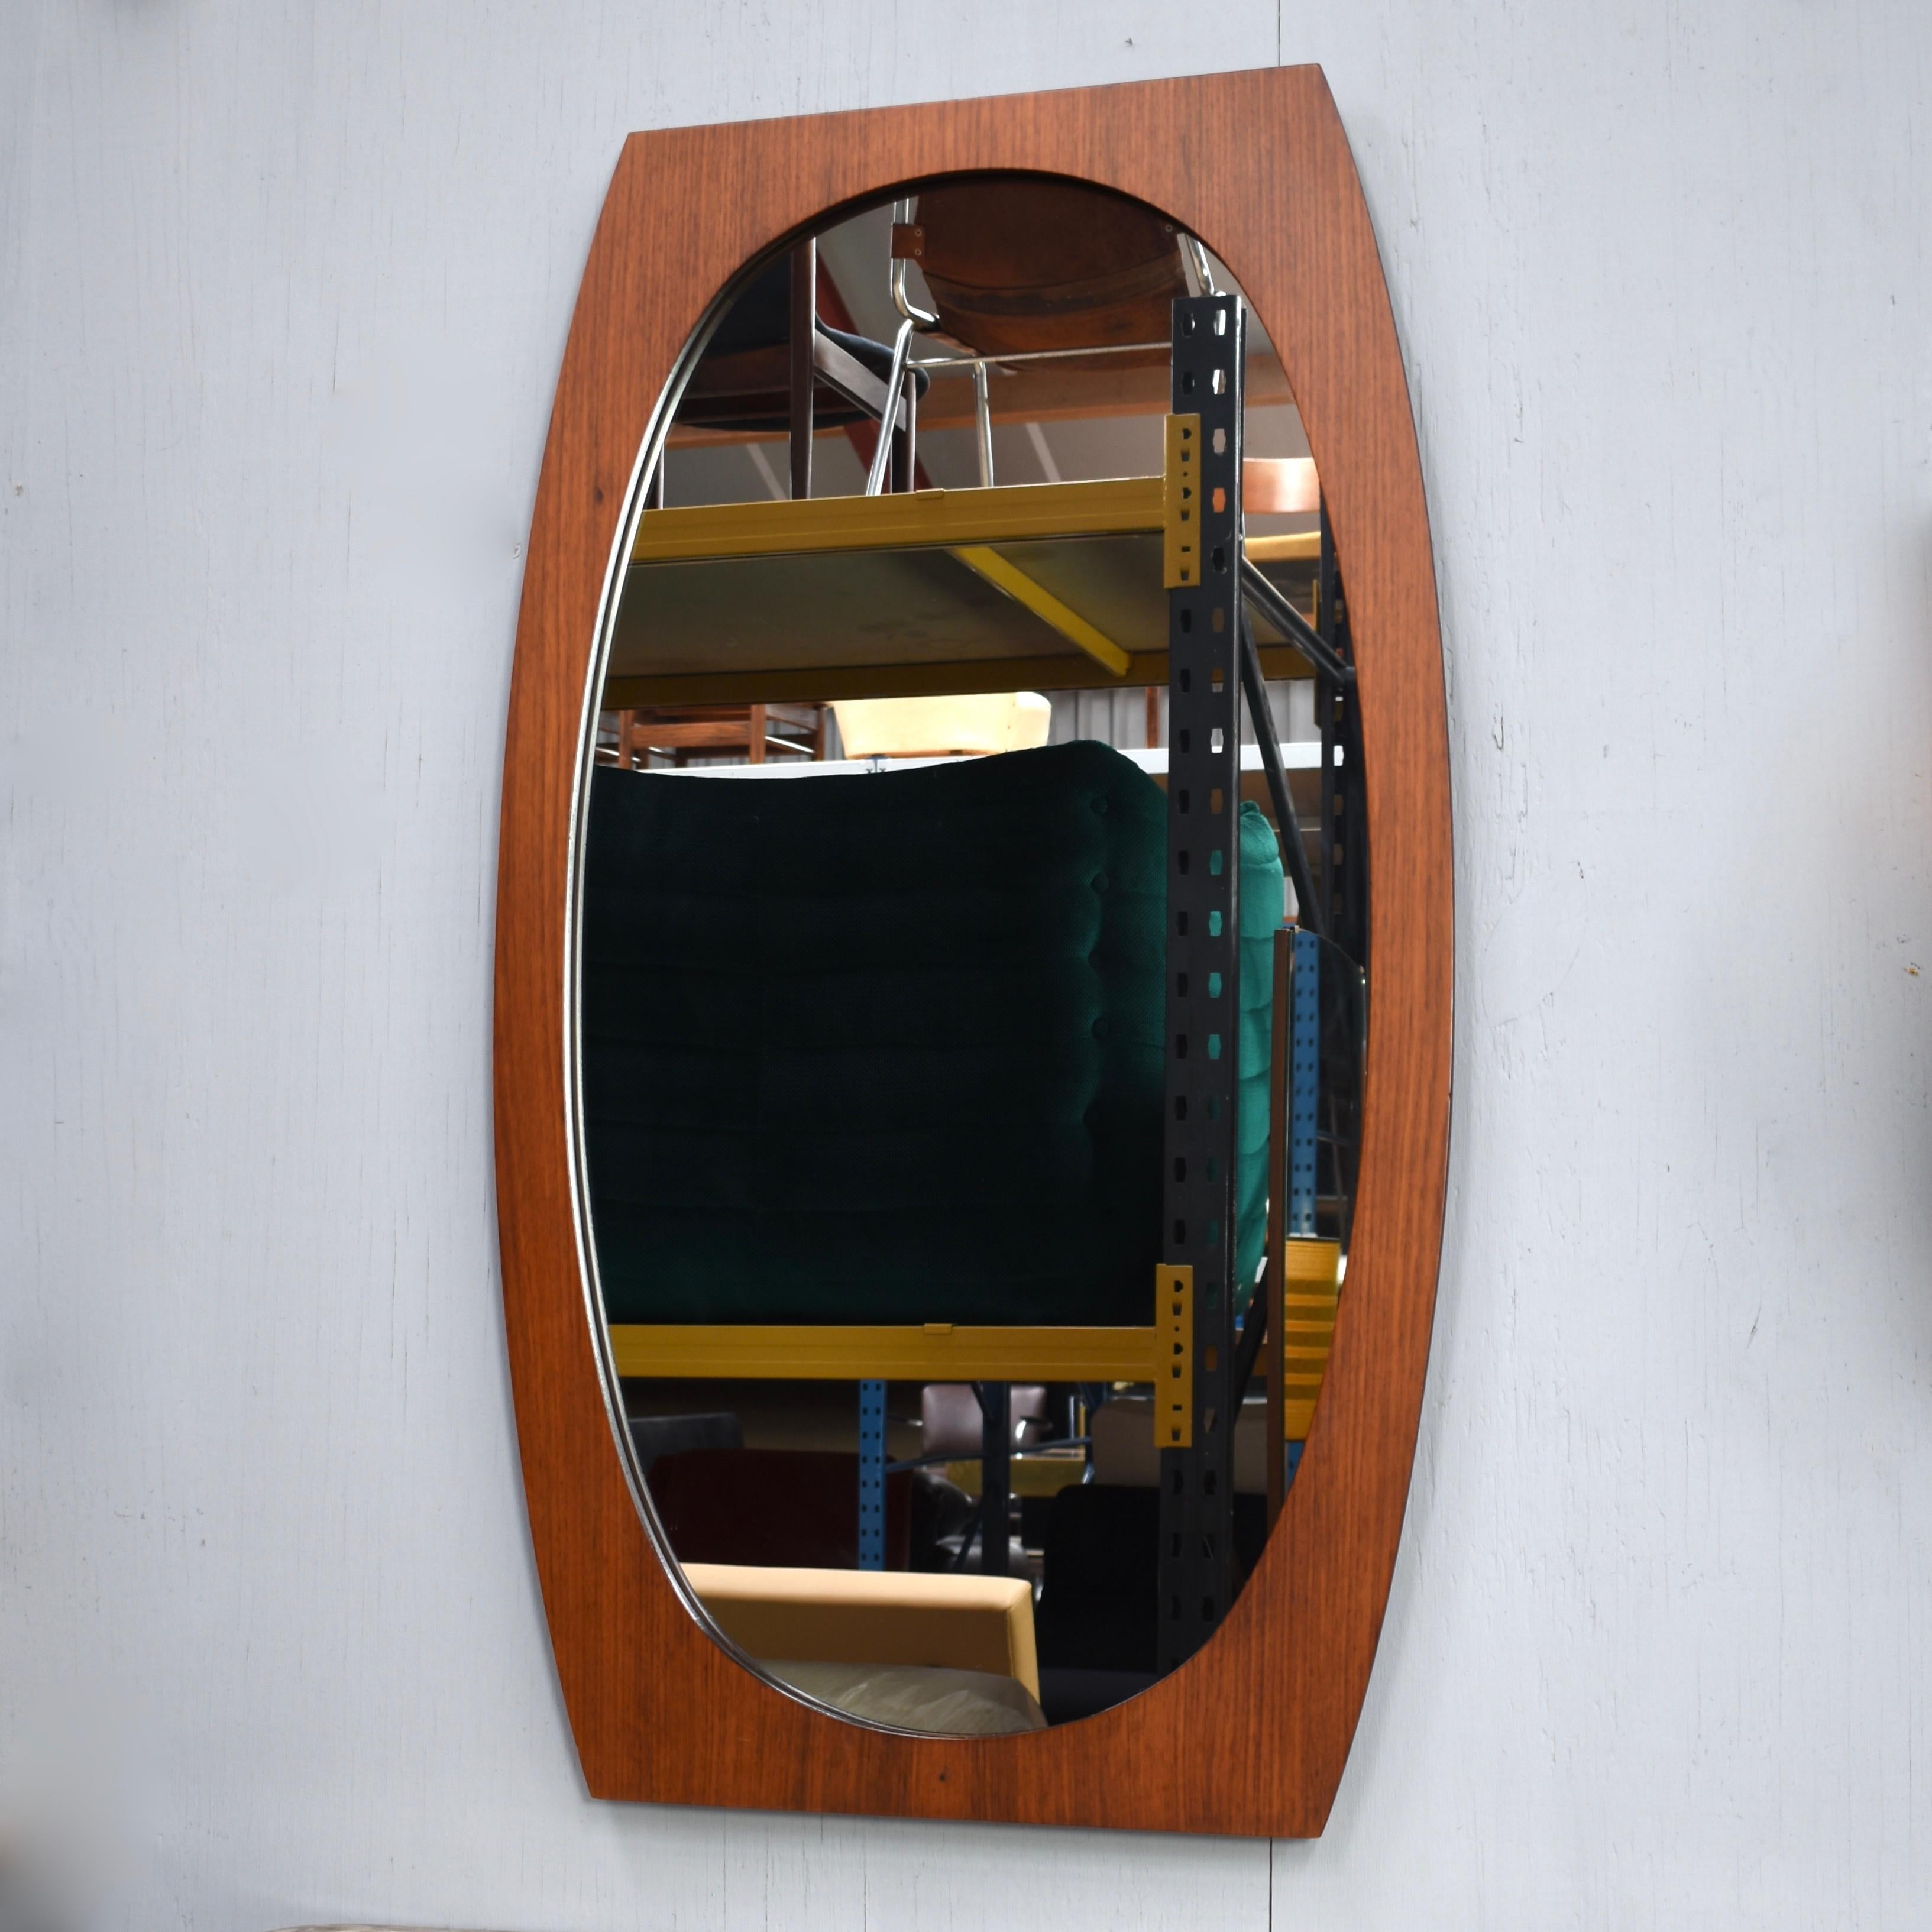 Italian Teak mirror, 1950s. The wood frame is made out off one piece of solid Teak.

Designer: Unknown

Manufacturer: Unknown

Country: Italy

Model: Mirror

Design period: circa 1950

Date of manufacturing: circa 1950

Size cm WxDxH: